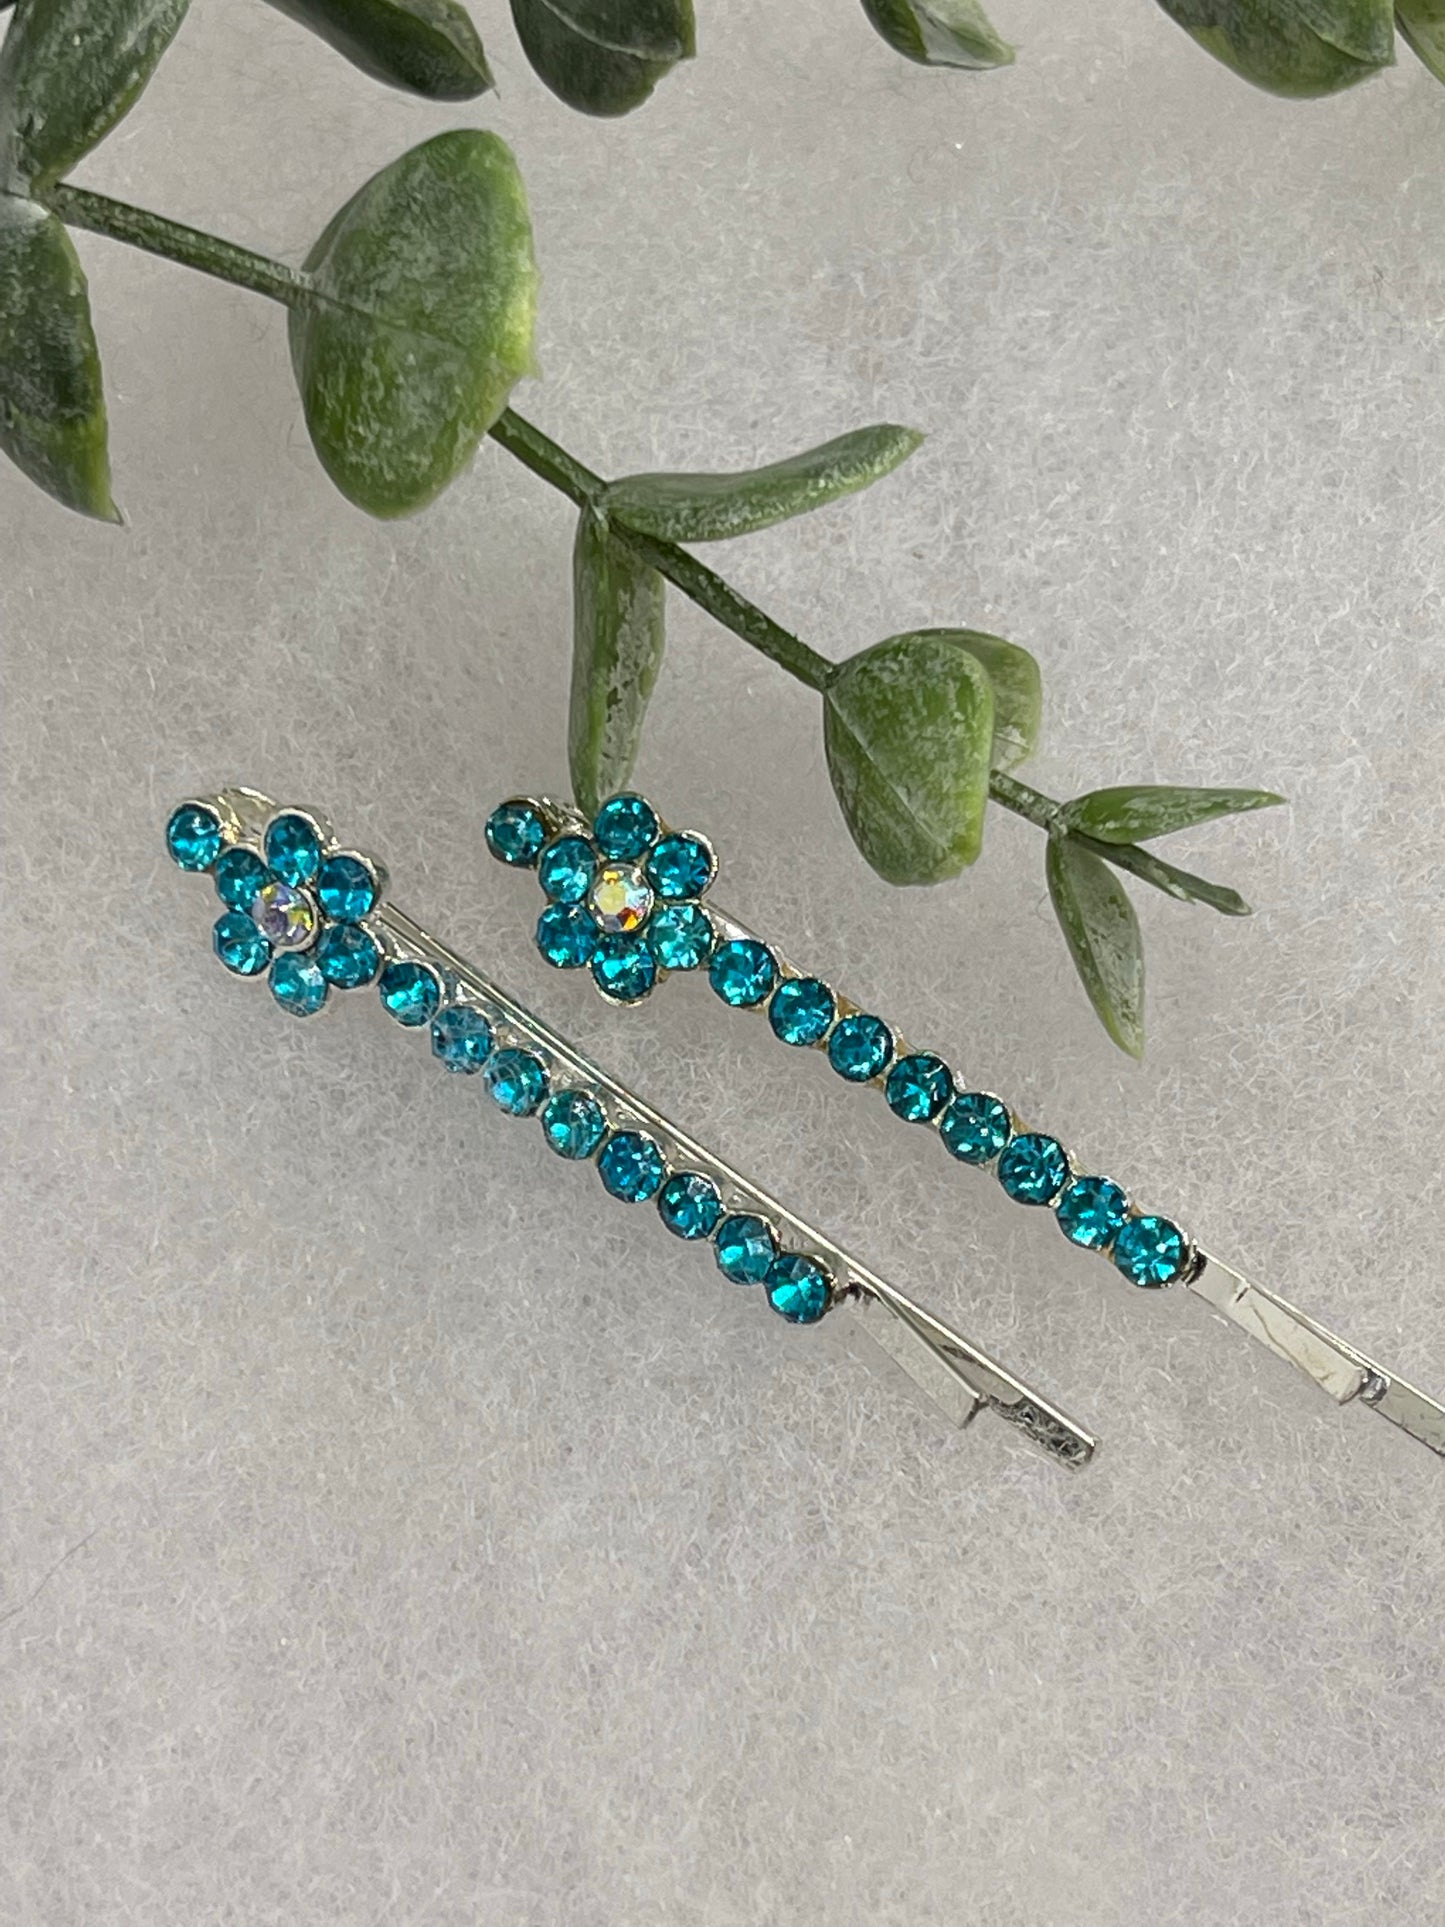 Teal crystal rhinestone approximately 2.0” silver tone hair pins 2 pc set wedding bridal shower engagement formal princess accessory accessories